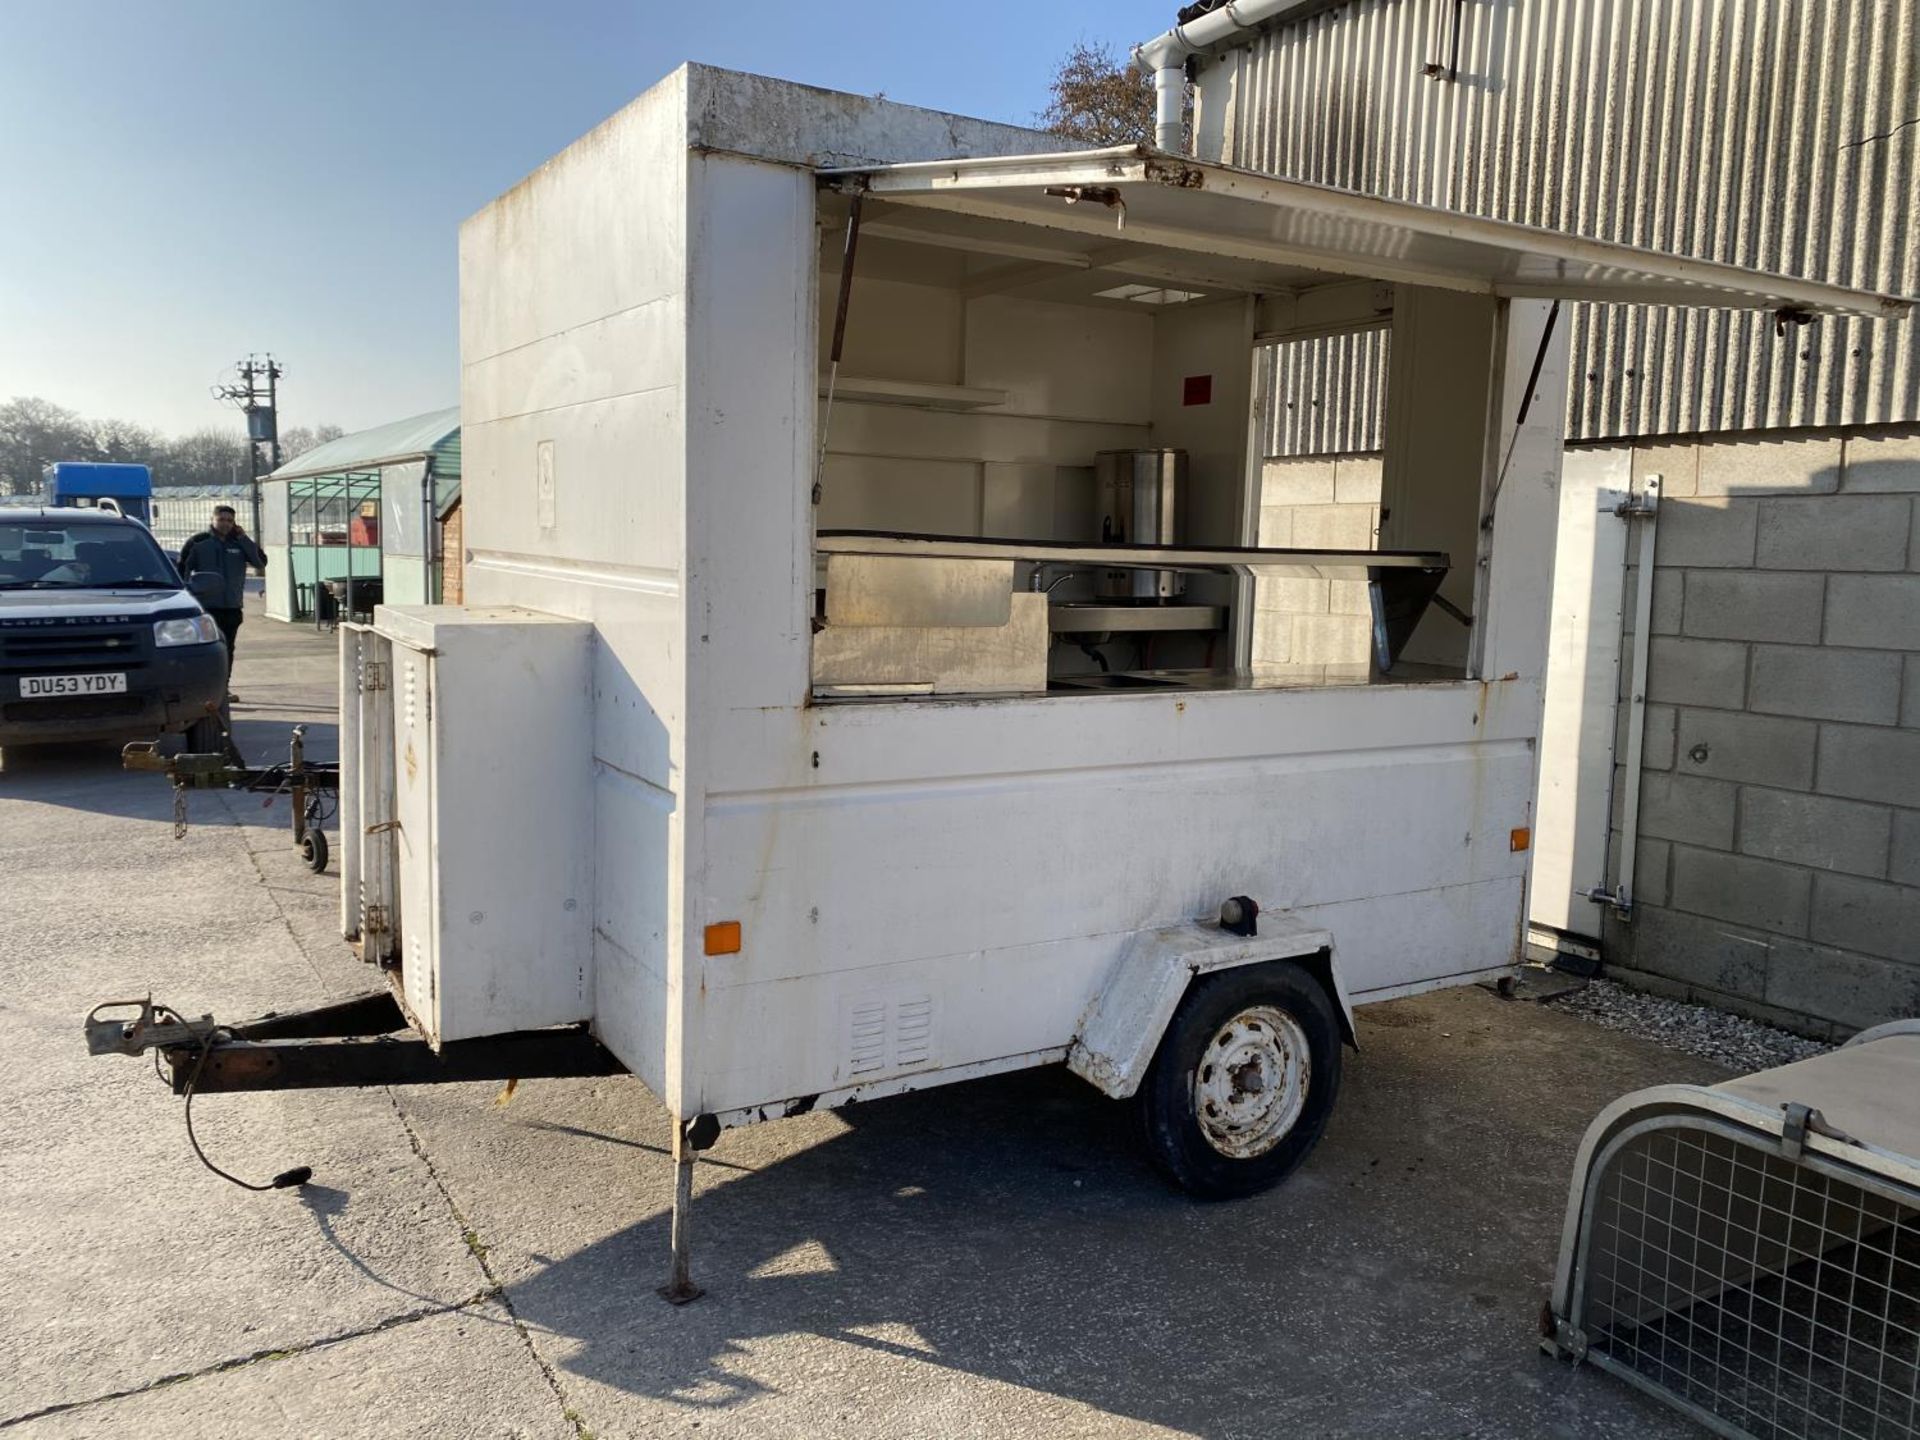 A CATERING TRAILER WITH LIFT UP SIDE. 8'3" LONG, 6' WIDE, DRAW BAR 3'3" LONG TOTAL LENGTH 11'6" WITH